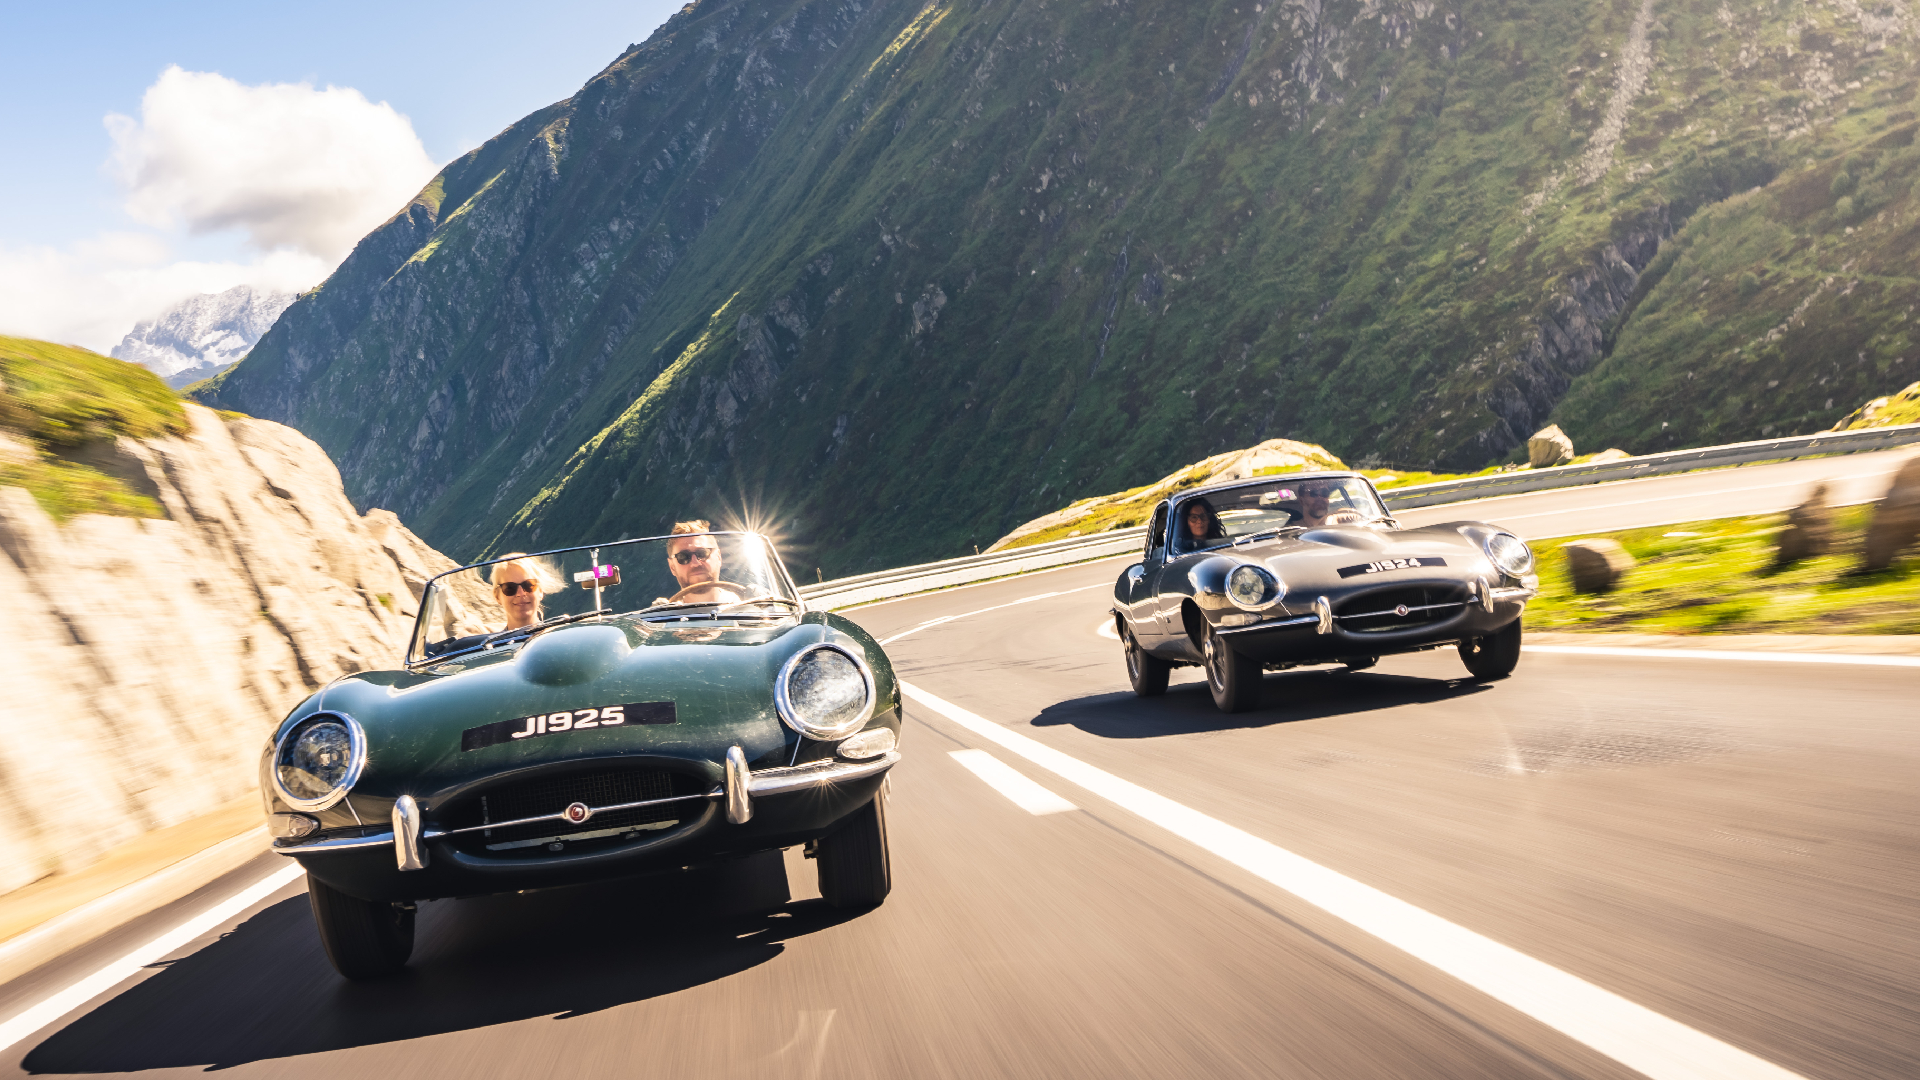 Two Jaguar E-types, a roadster and coupe, driving down a mountain road at speed.